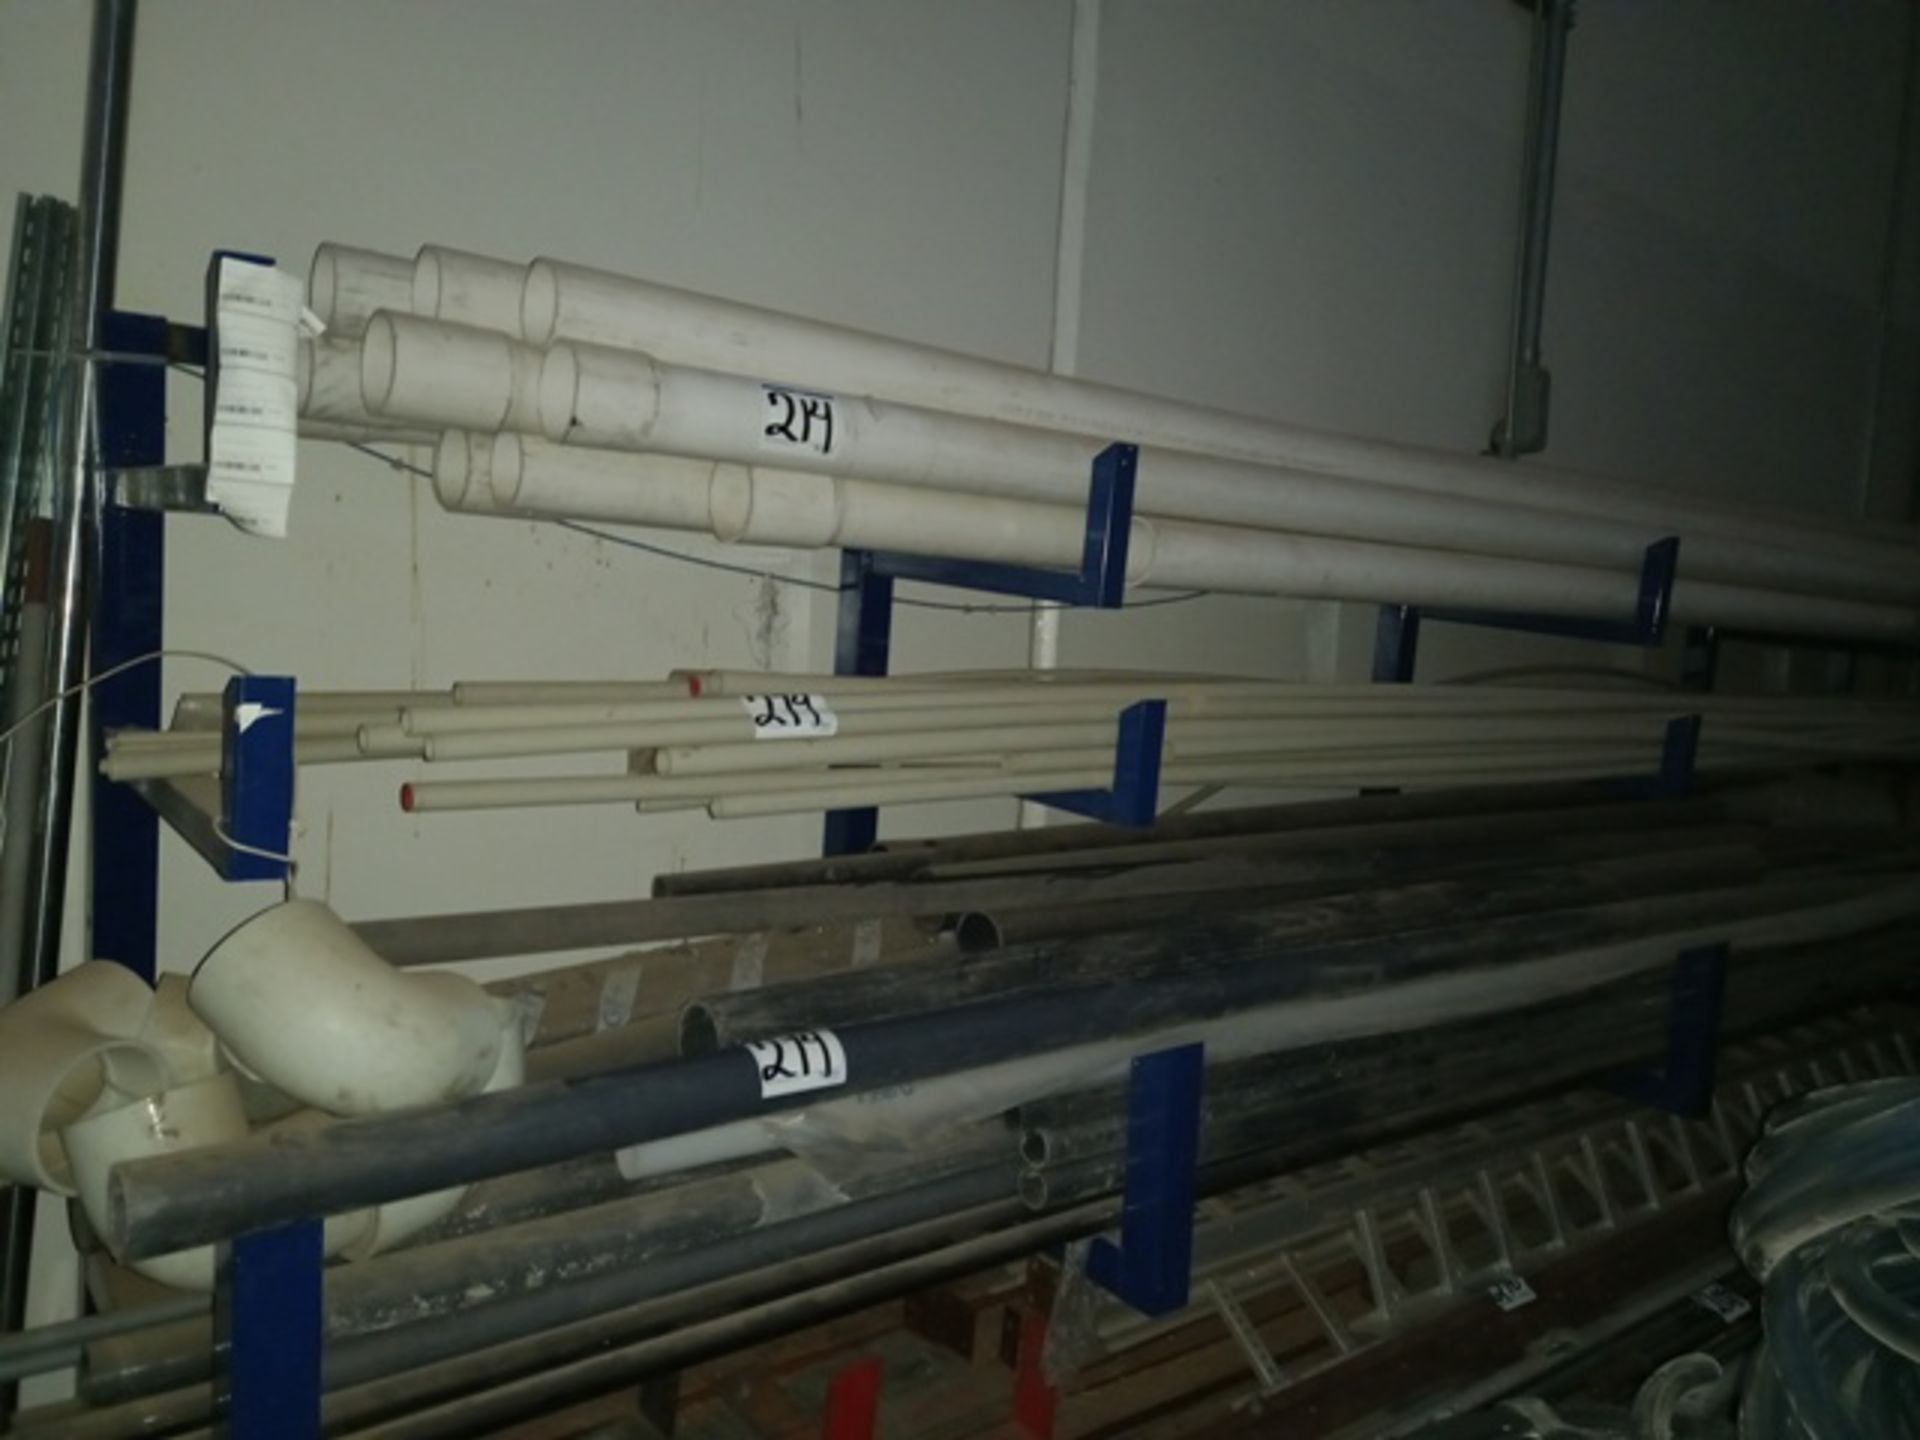 Lot of (1) Metallic Rack with Hydraulic PVC Pipe, Different Sizes (1" - 4")